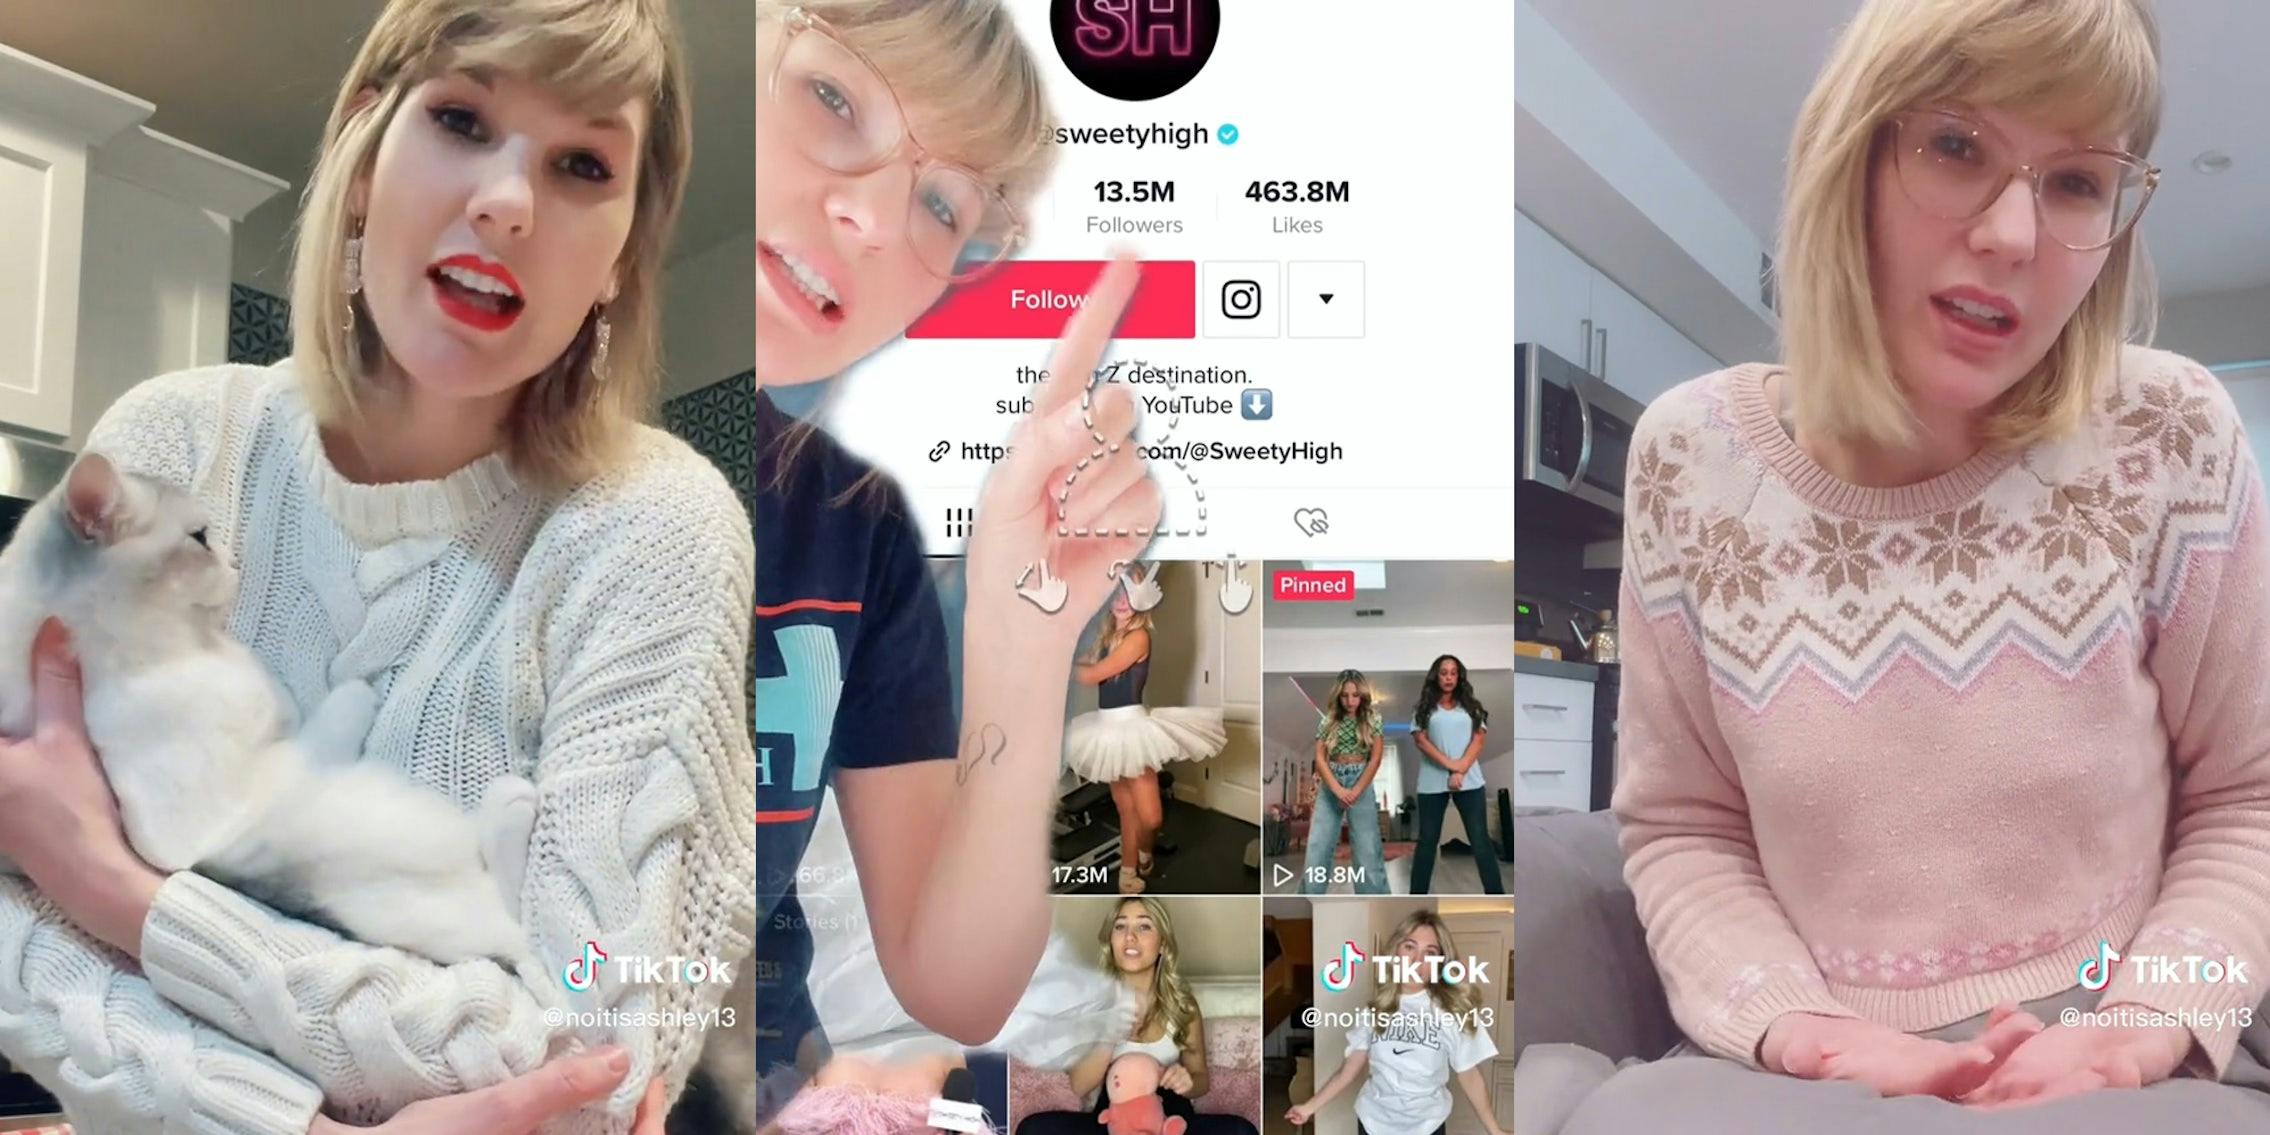 Taylor Swift lookalike TikToker claims she was uninvited from Grammys, sparking speculation and criticism